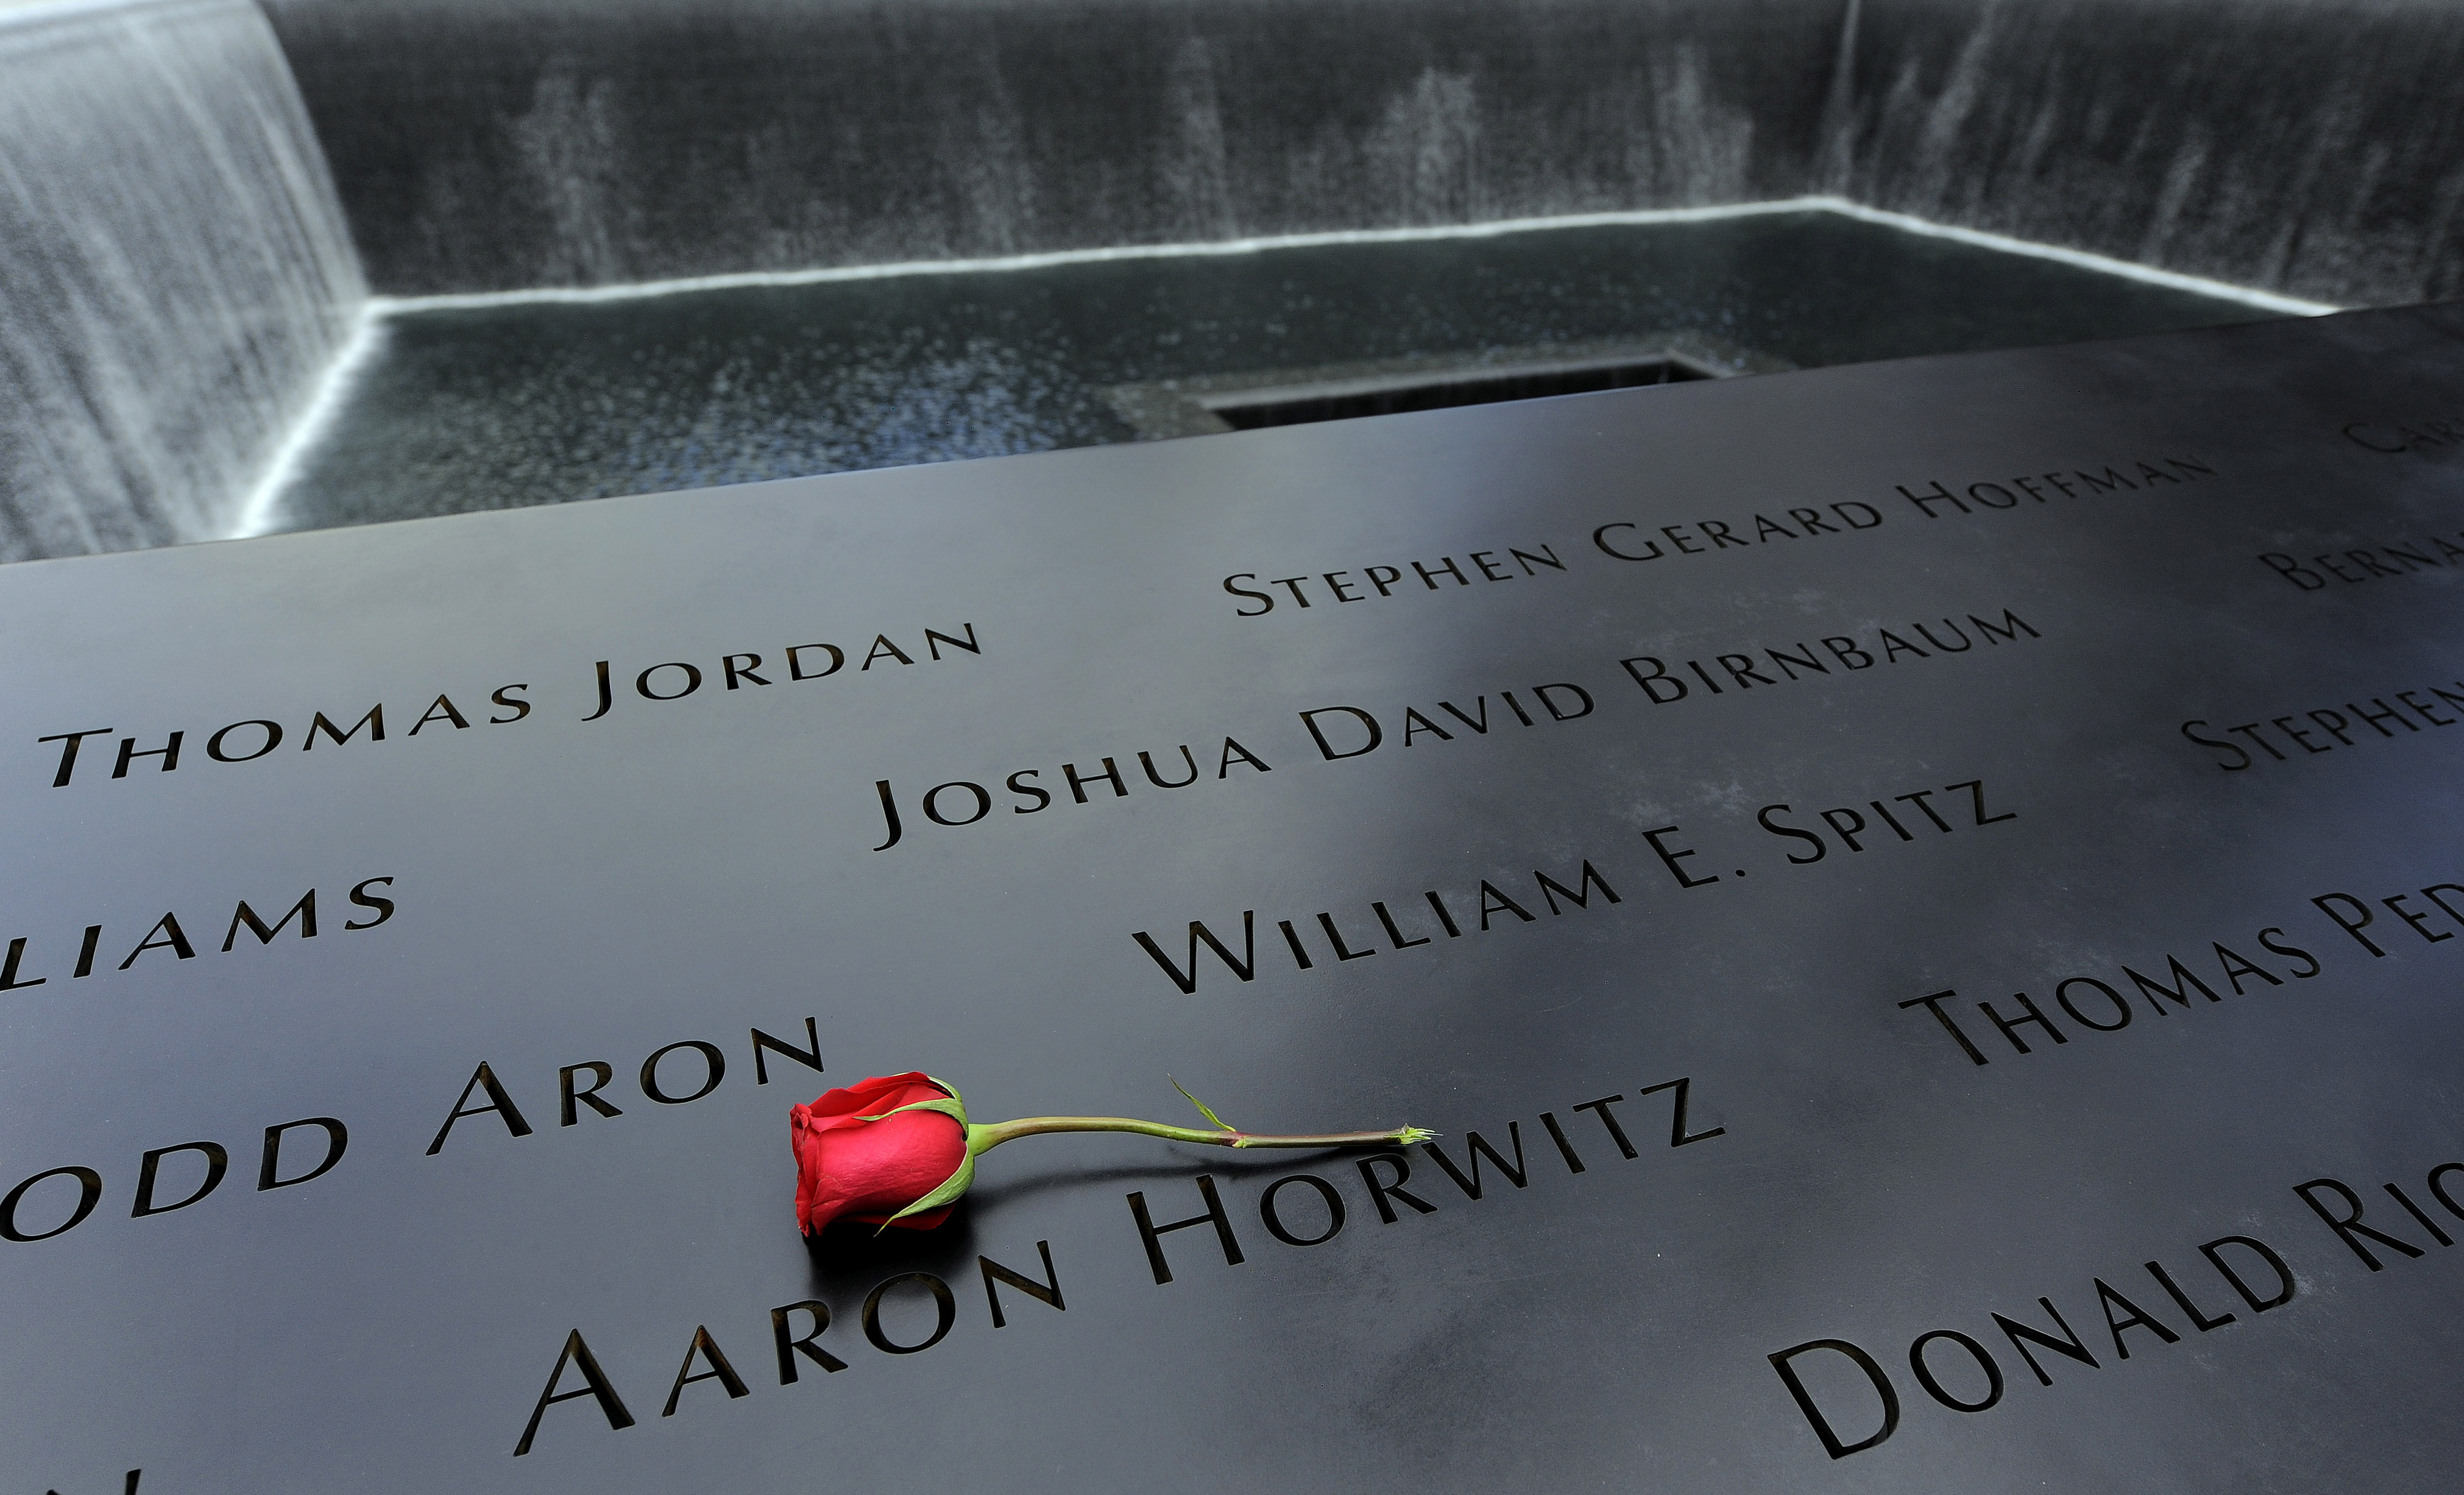 A rose is placed on the names inscribed around the North Pool of the 9/11 Memorial during tenth anniversary ceremonies at the site of the World Trade Center in New York on Sept. 11, 2011. (Justin Lane—AFP/Getty Images)